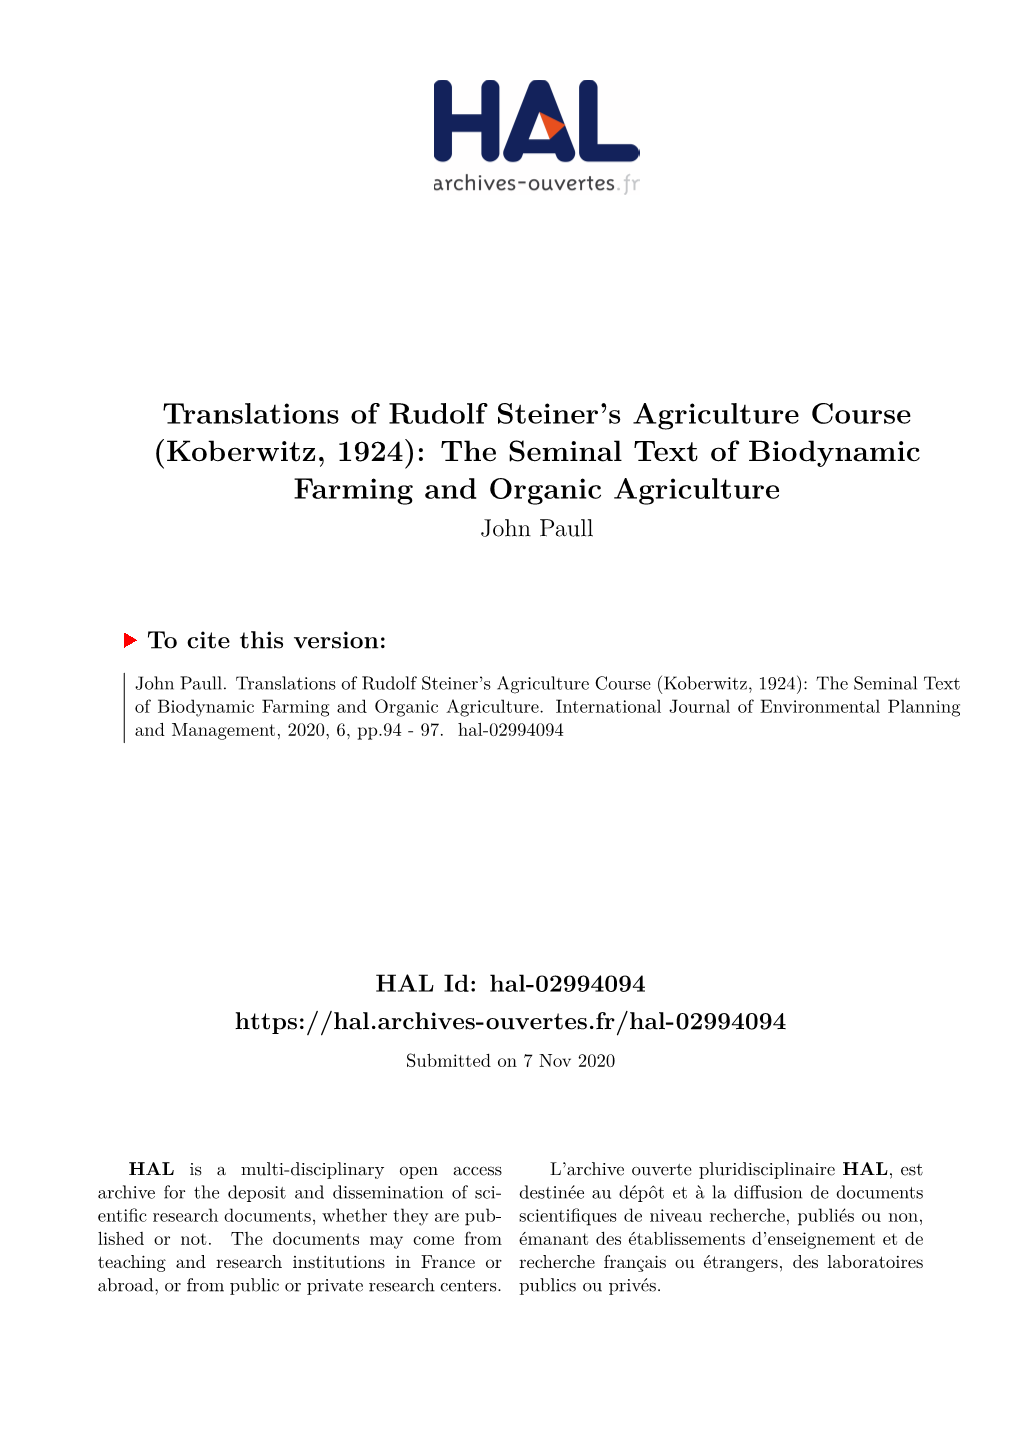 Translations of Rudolf Steiner's Agriculture Course (Koberwitz, 1924): the Seminal Text of Biodynamic Farming and Organic Ag